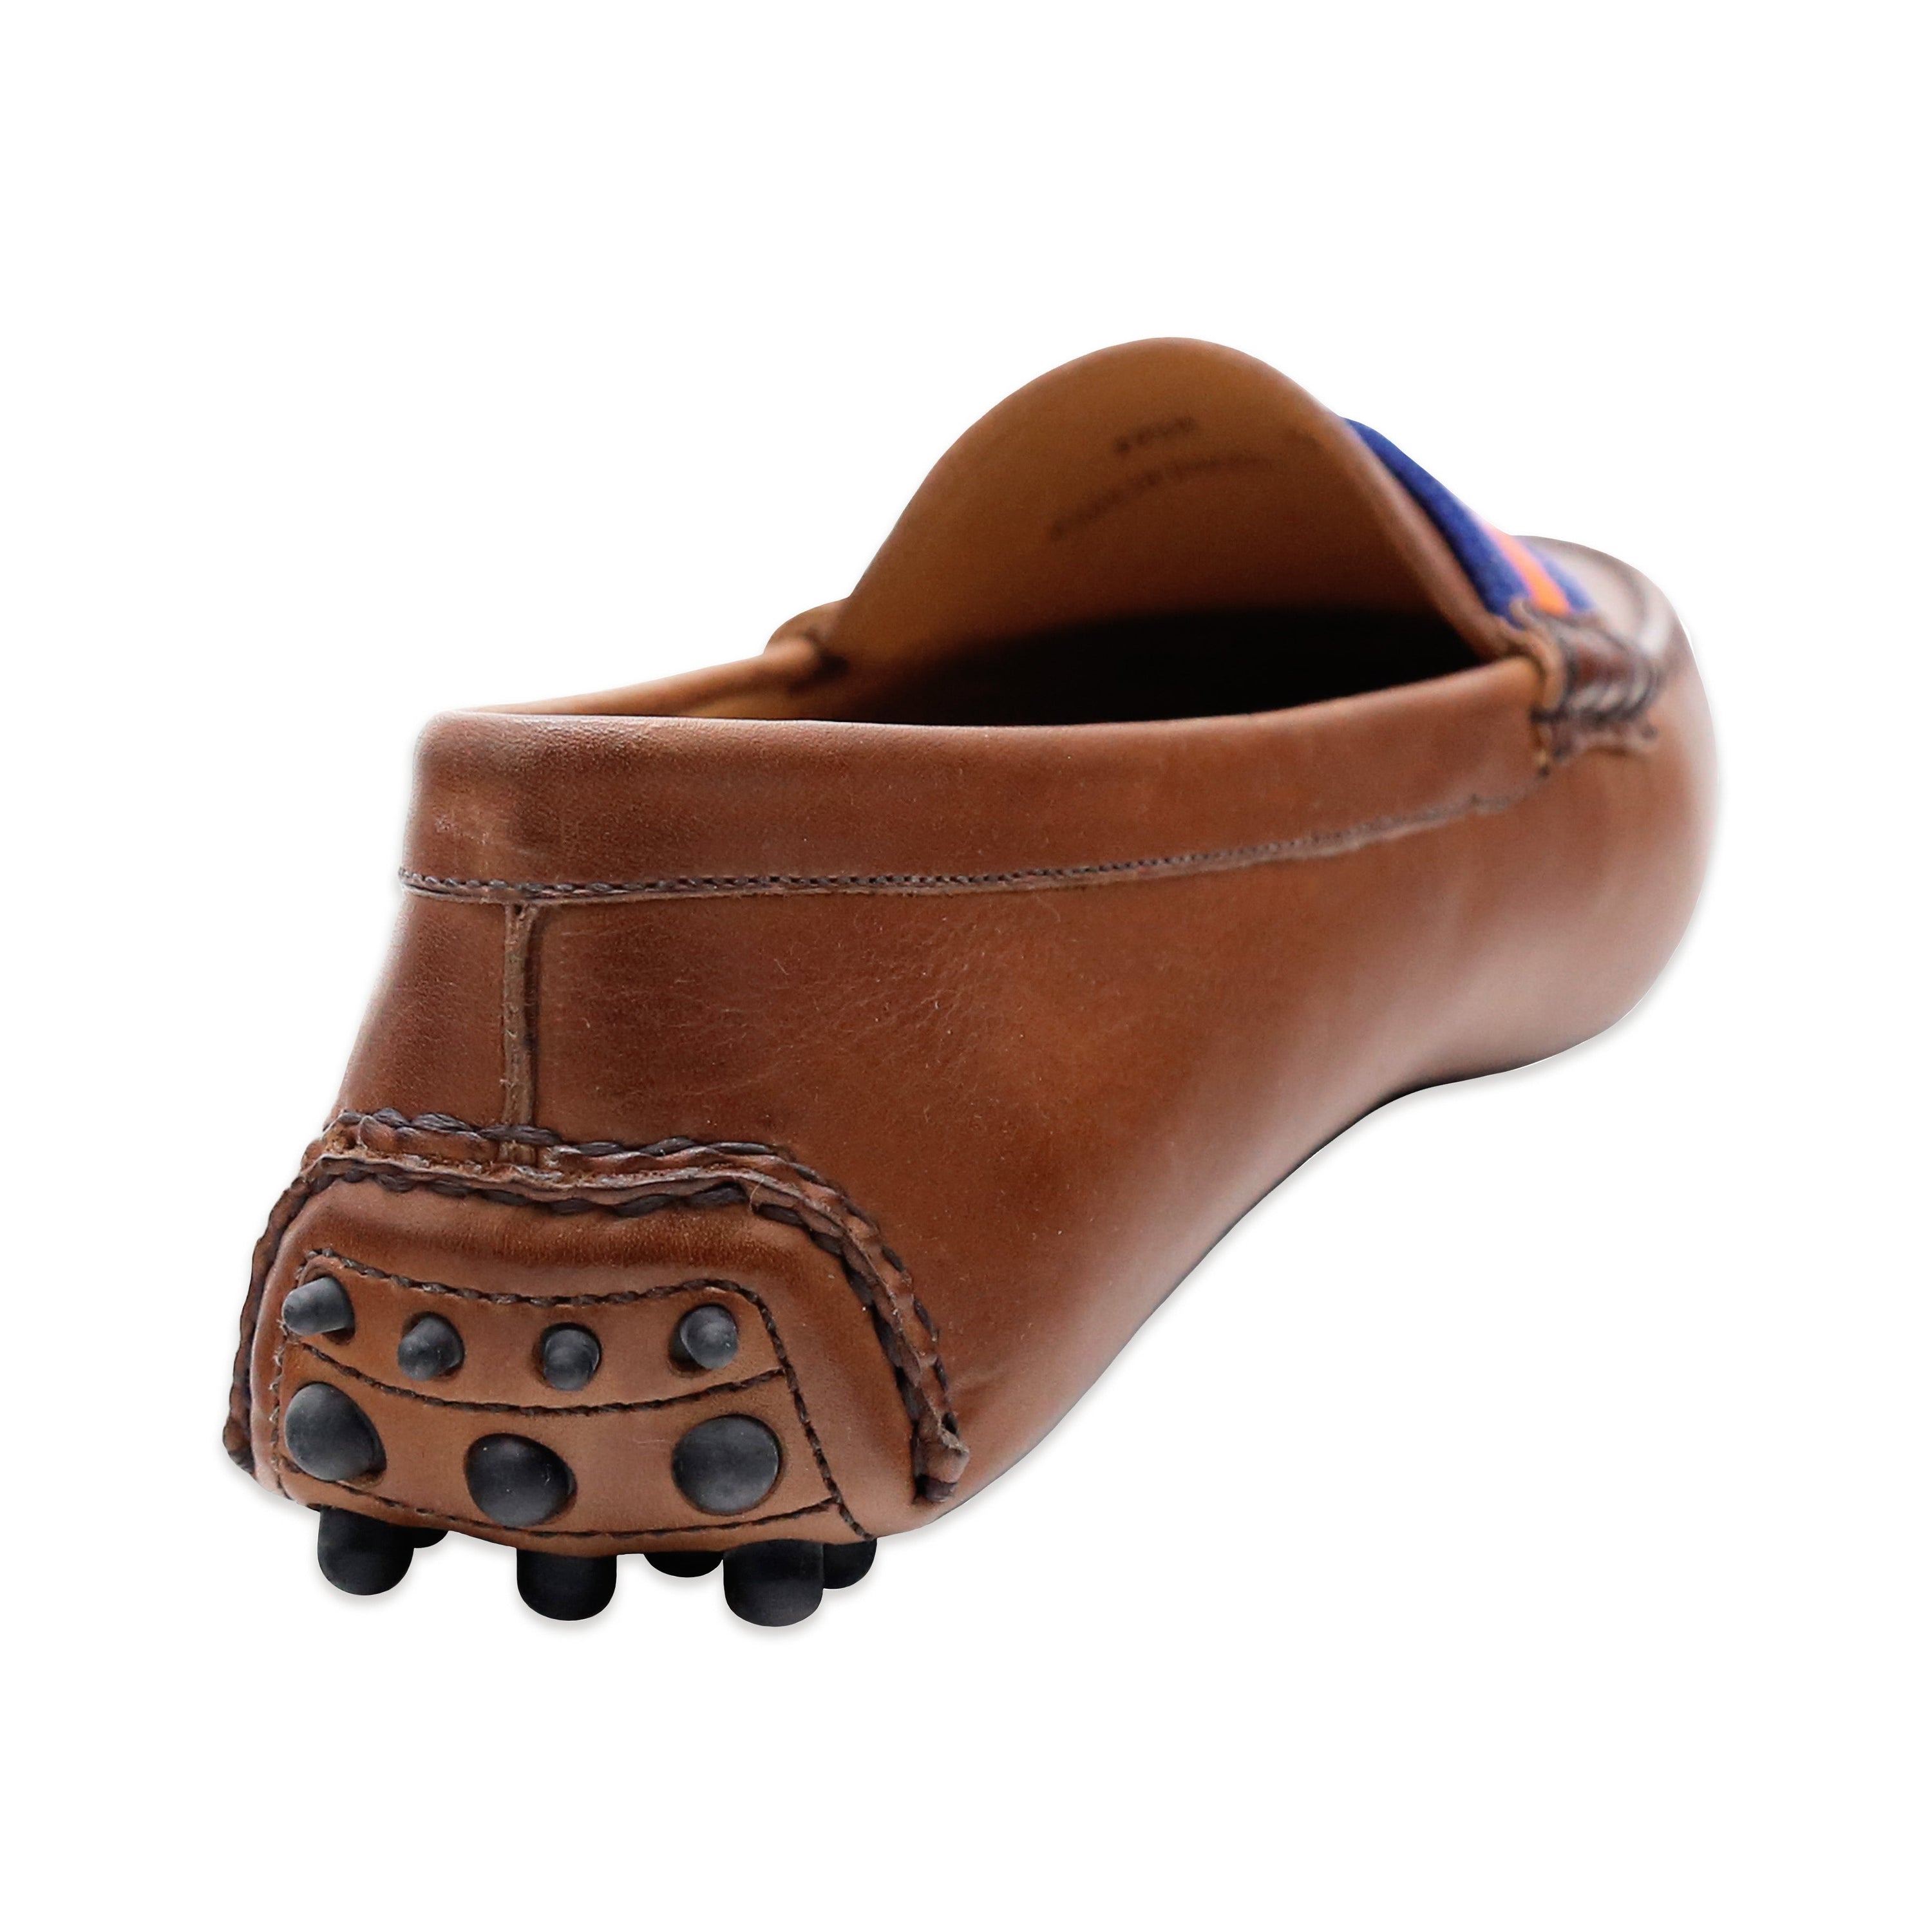 & Shoes Leather-Logo) Driving – (Blue-White) Kentucky Surcingle Branson (Chestnut Smathers